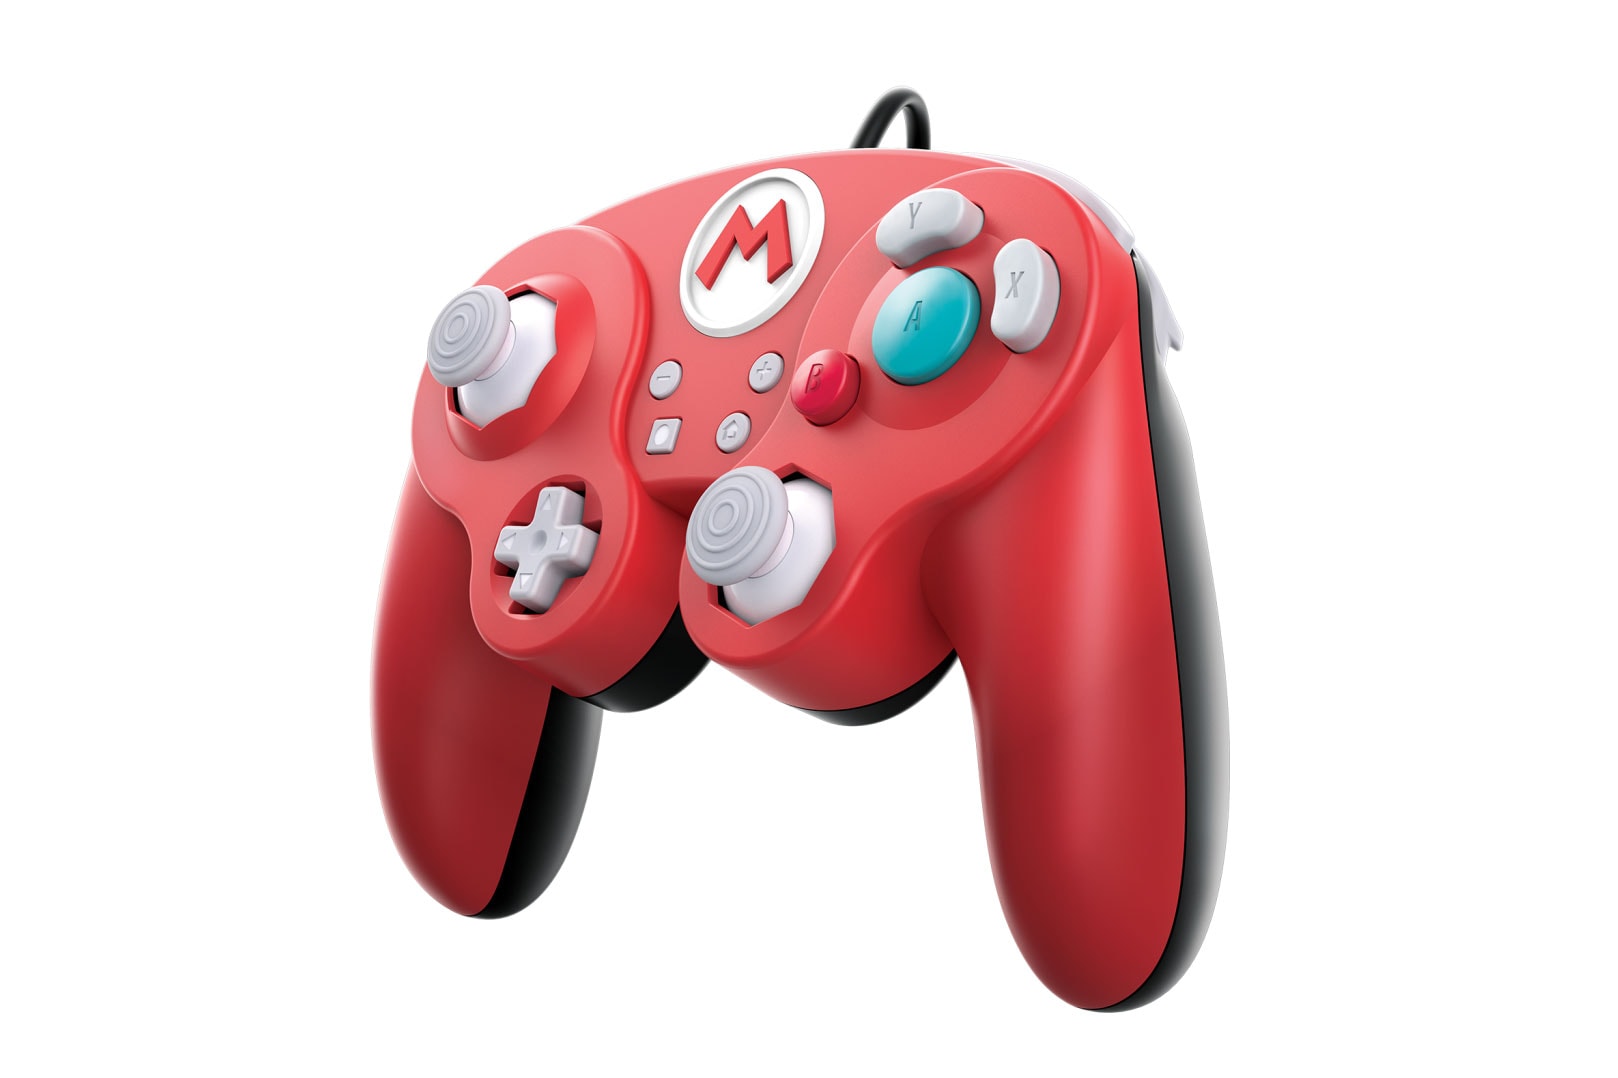 nintendo switch super smash bros pdp Wired Smash Pad Pro gamecube inspired controller adaptor c stick wired customizable